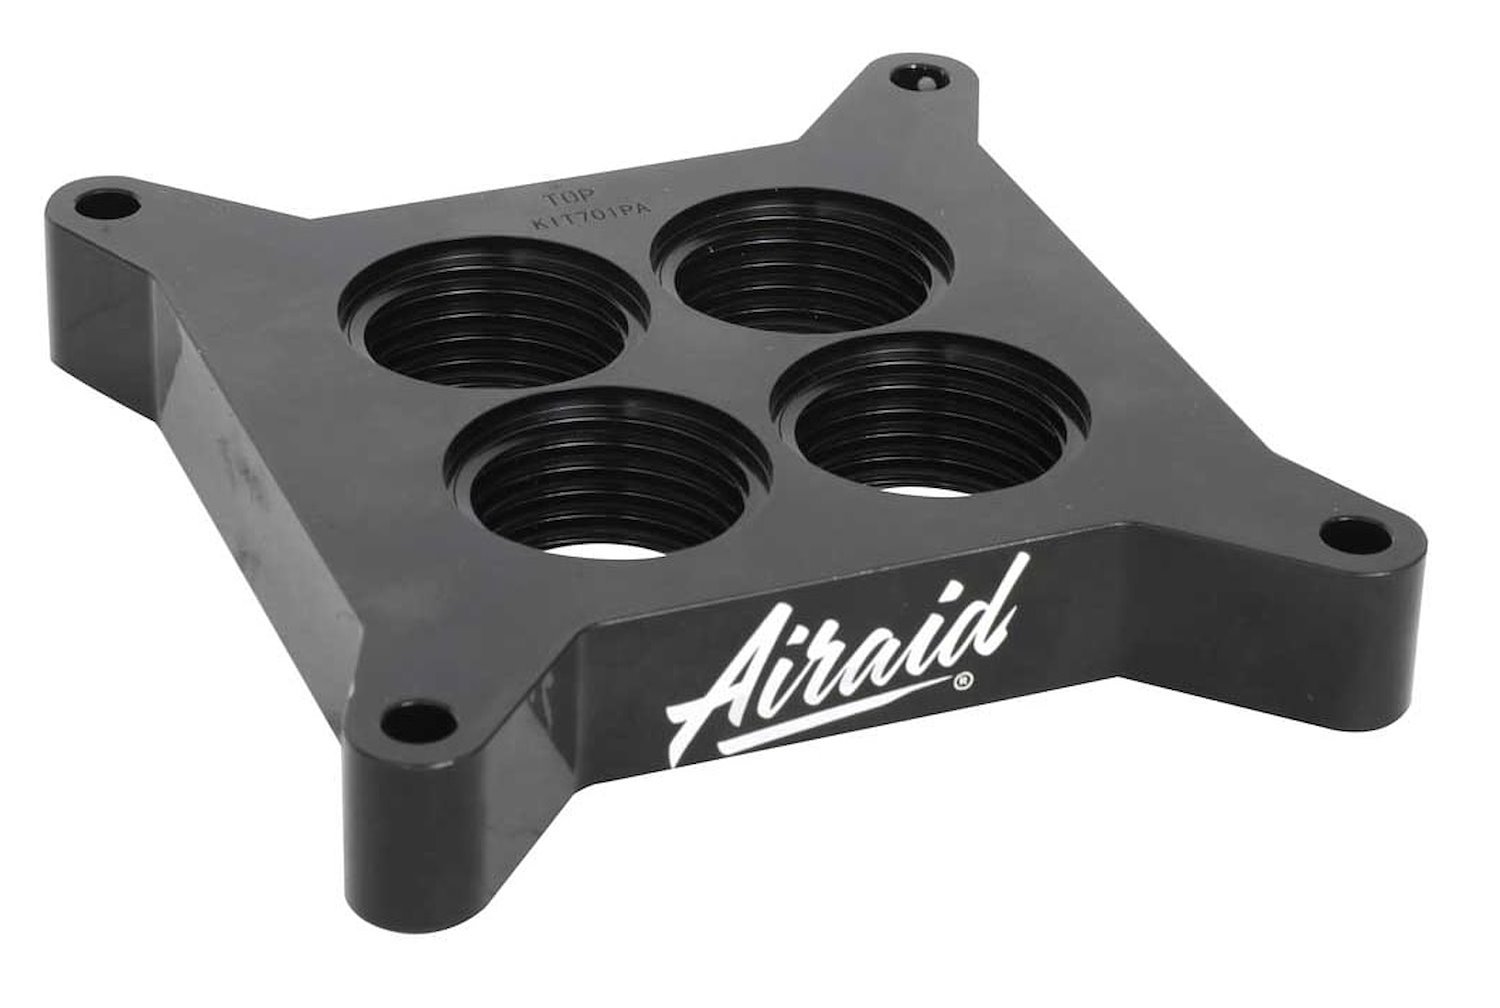 PowerAid Throttle Body Spacer Holley 4150/4160, Edelbrock, OE-Style Square Flange 4-bbl [Black]